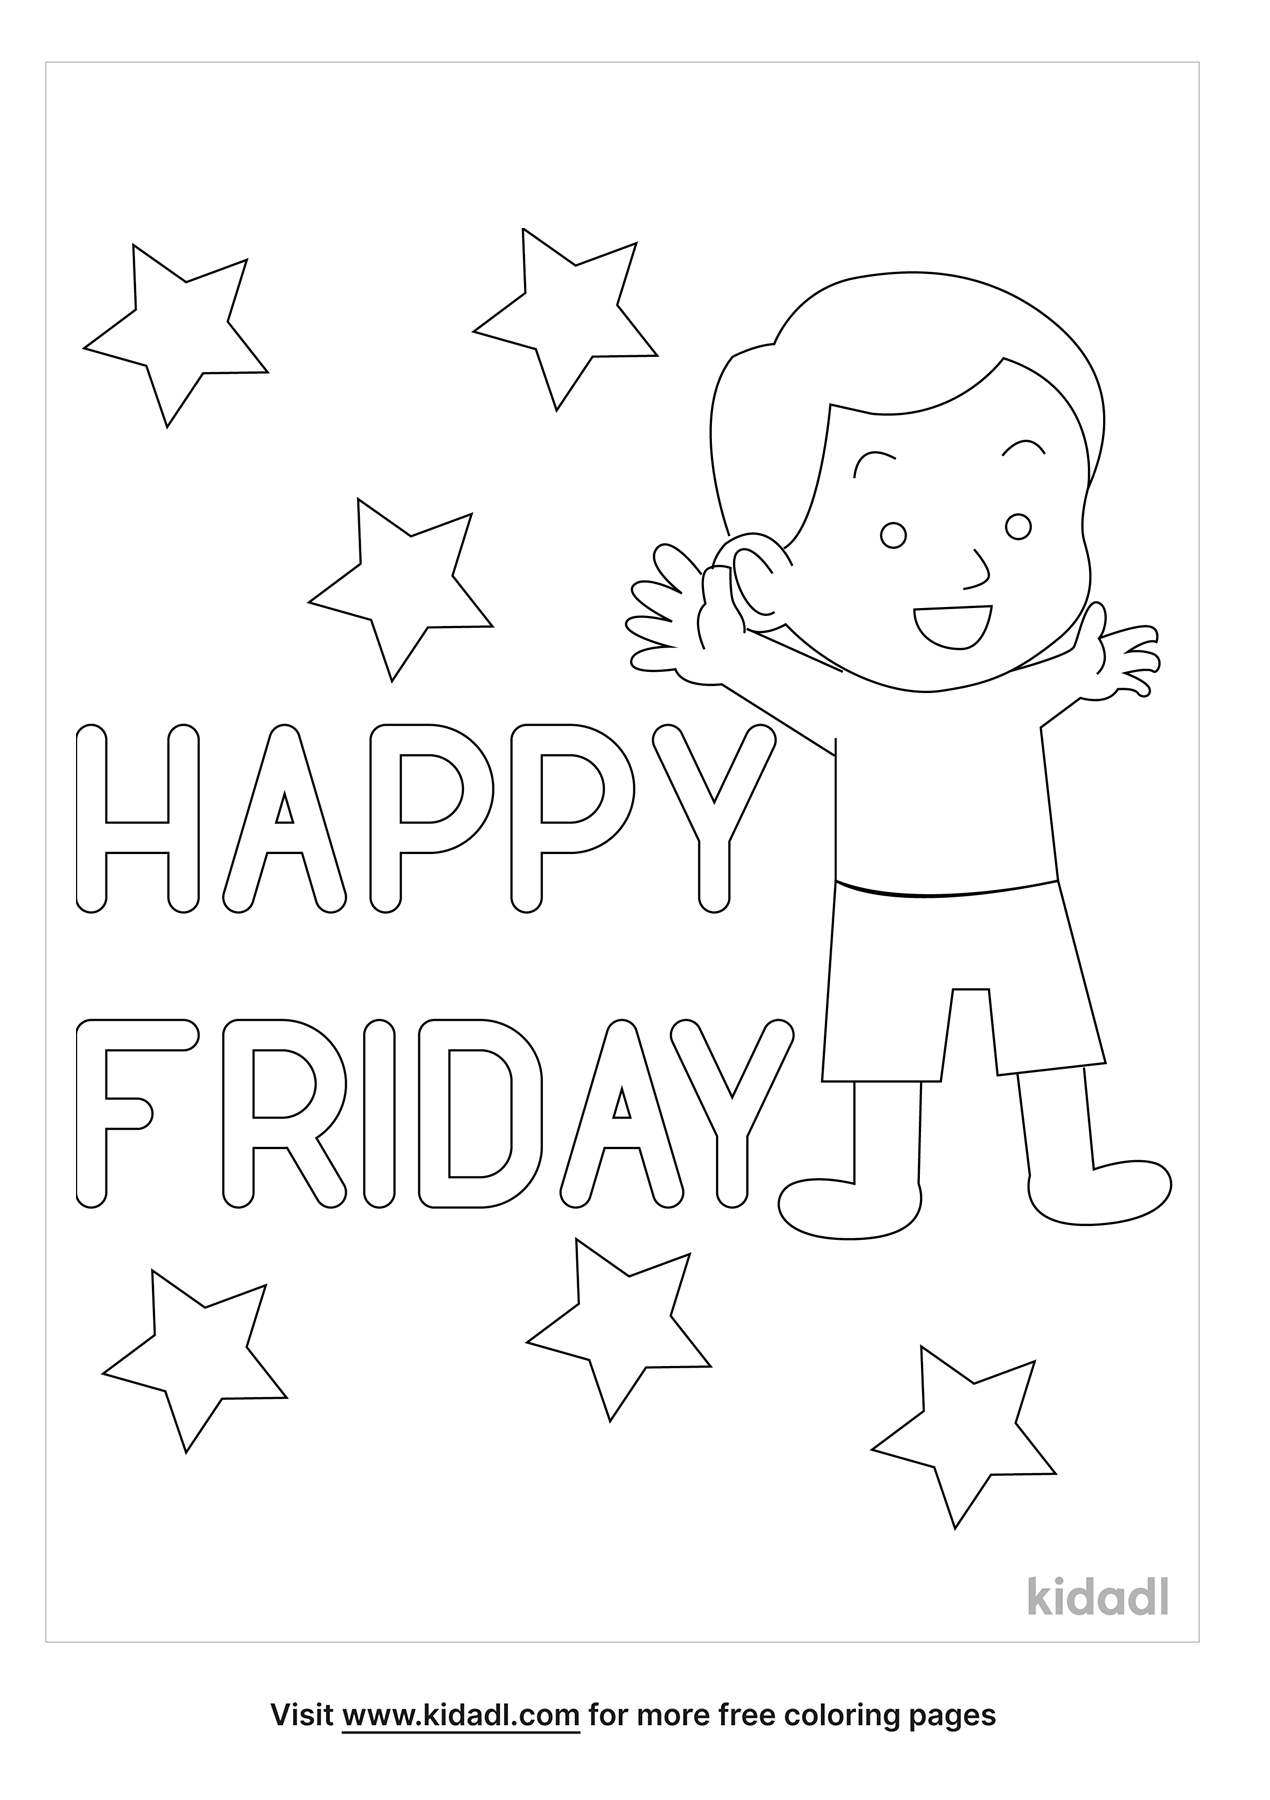 Happy Friday Coloring Pages | Free Seasonal & Celebrations Coloring Pages |  Kidadl